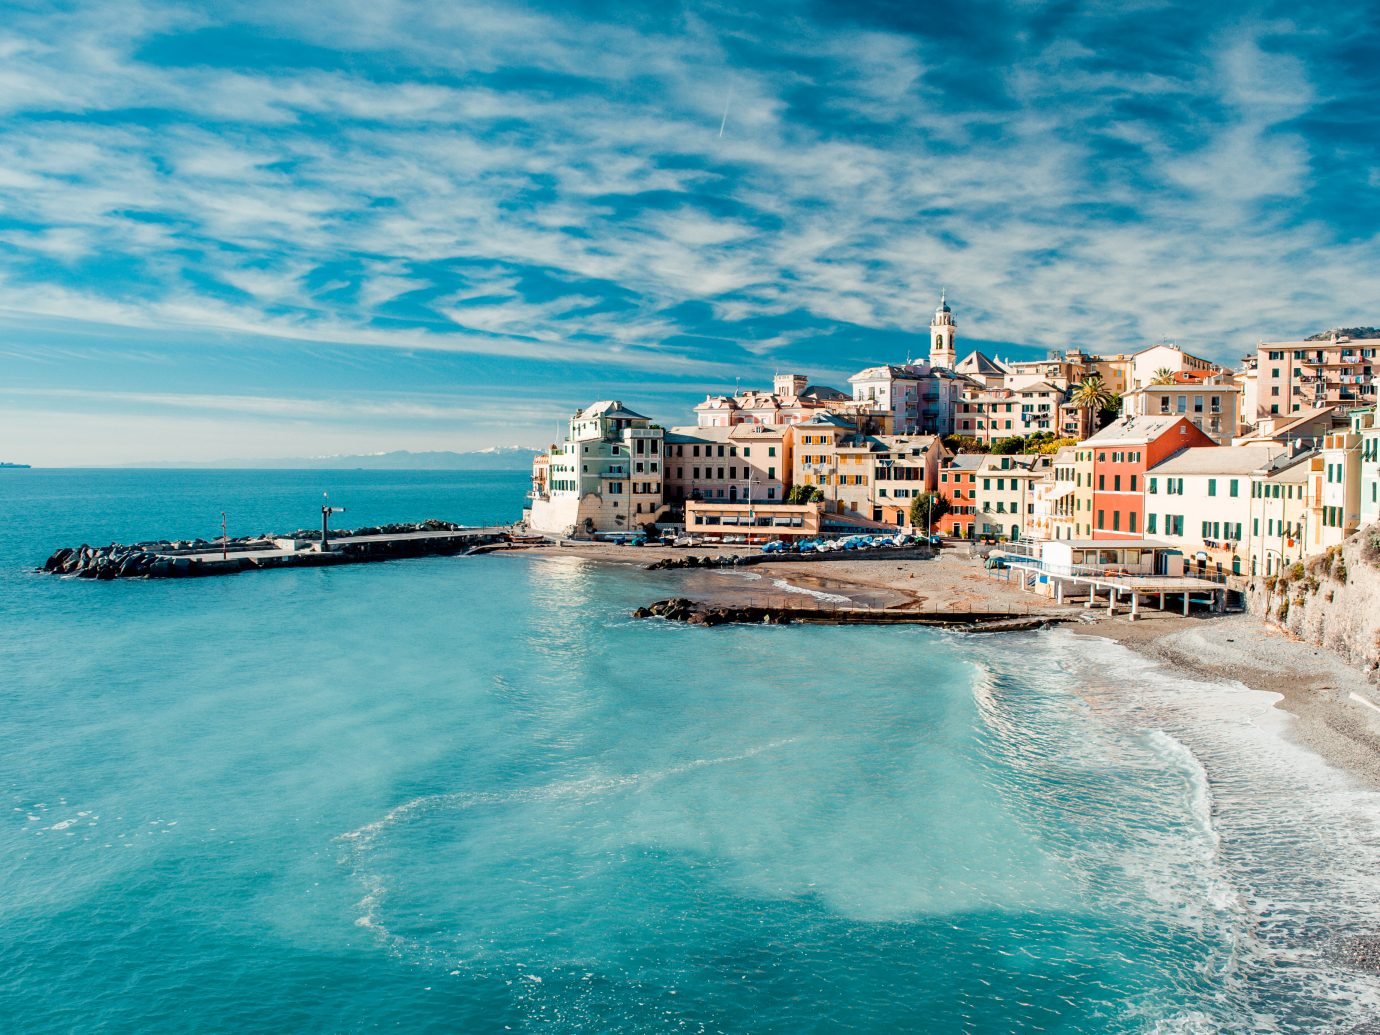 View of blue water in Genoa, Italy